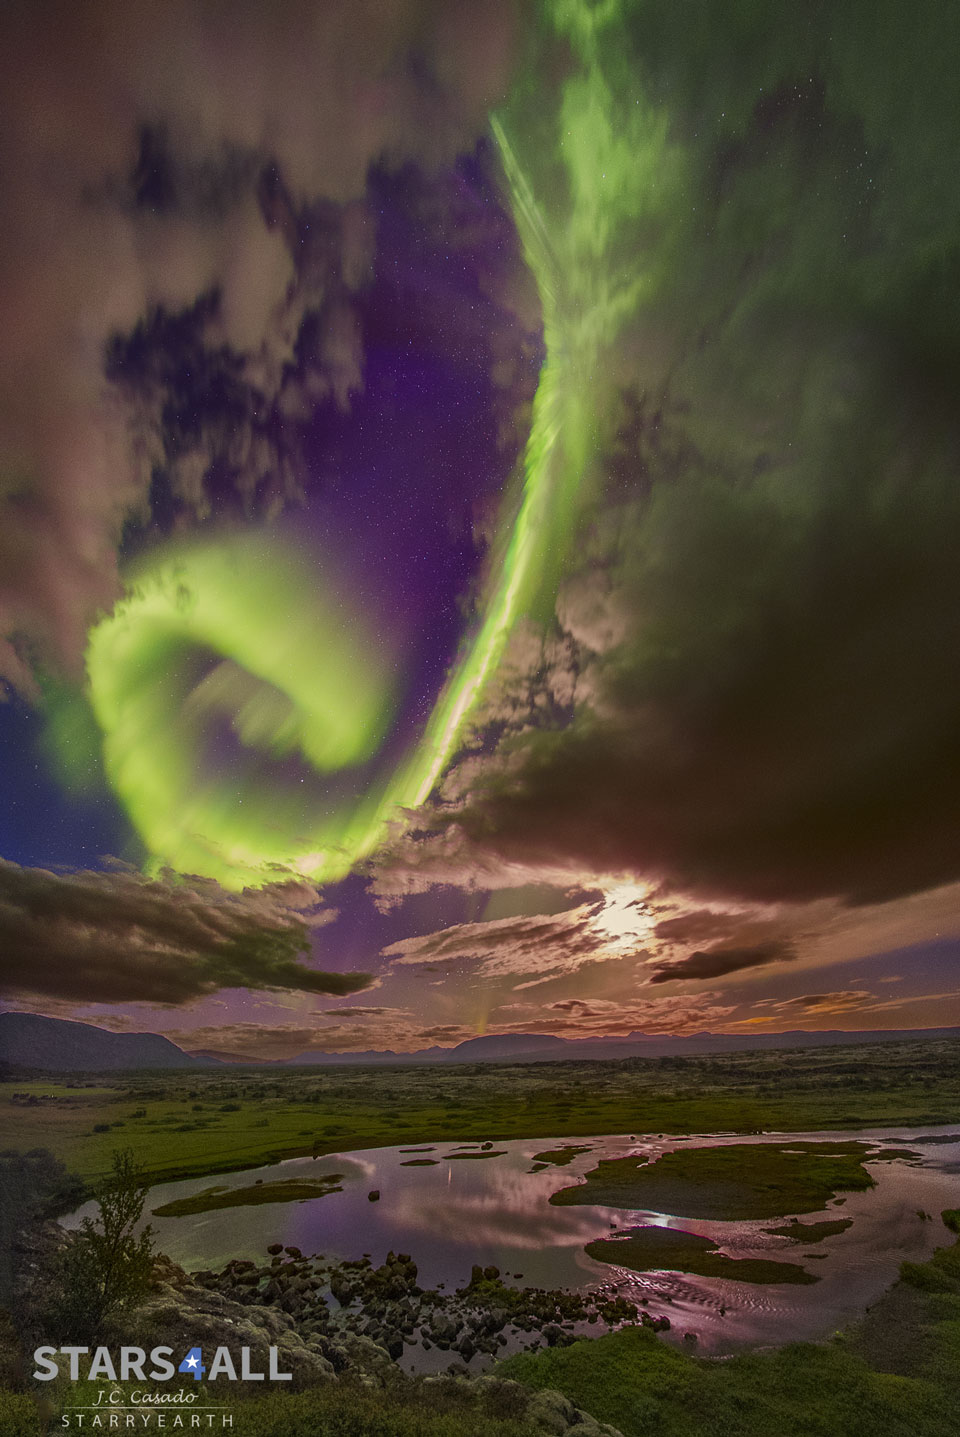 A bright green spiral aurora is seen in a break in the 
clouds before a purple background. The foreground contains 
green grassland and a circular lake.
Please see the explanation for more detailed information.